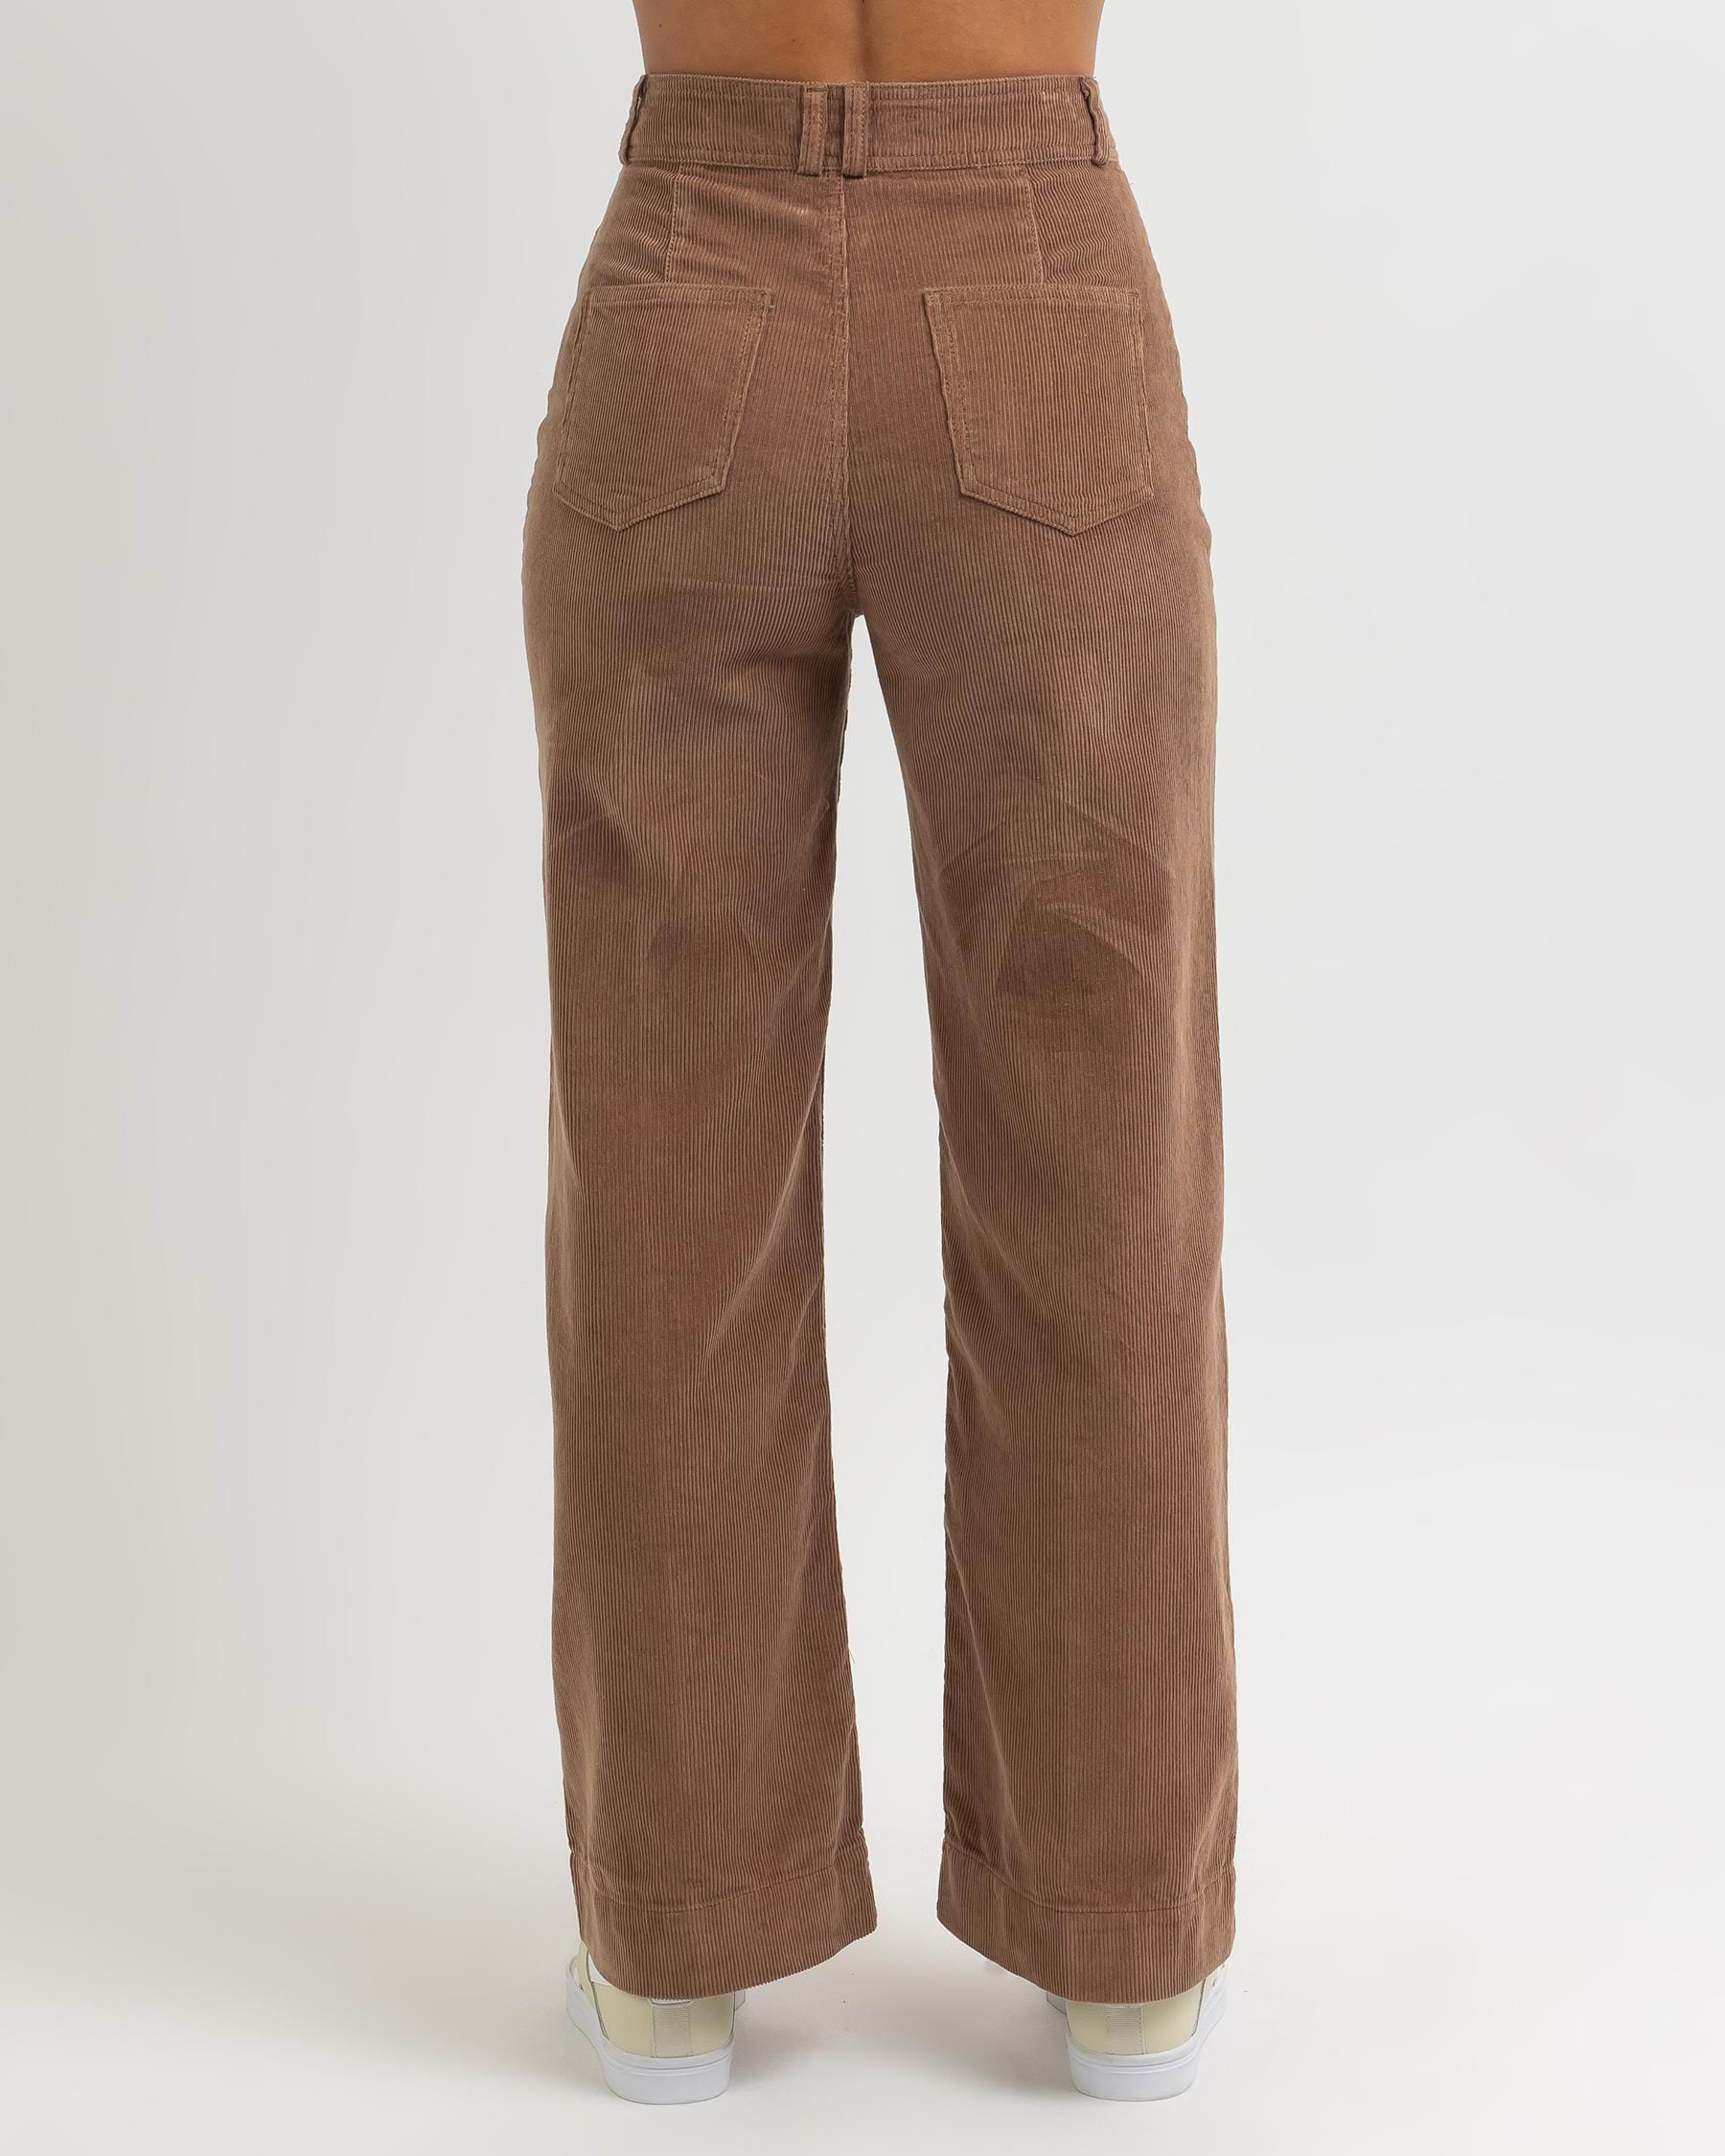 Ava And Ever New Jersey Pants In Milk Chocolate - Fast Shipping & Easy ...